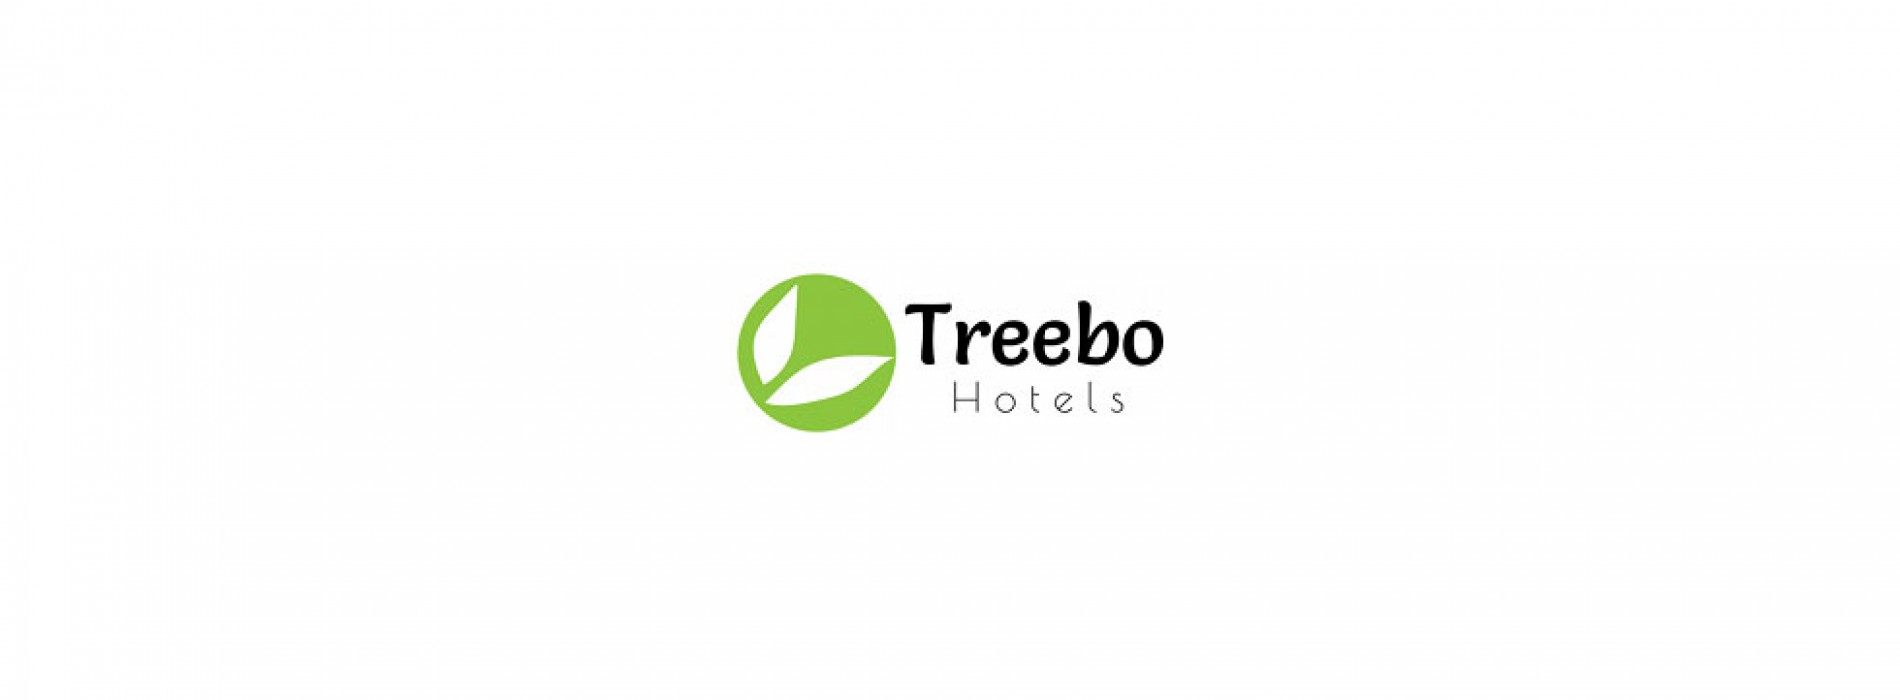 Treebo Hotels earns 2016 Tripadvisor Certificate of Excellence for 9 Properties